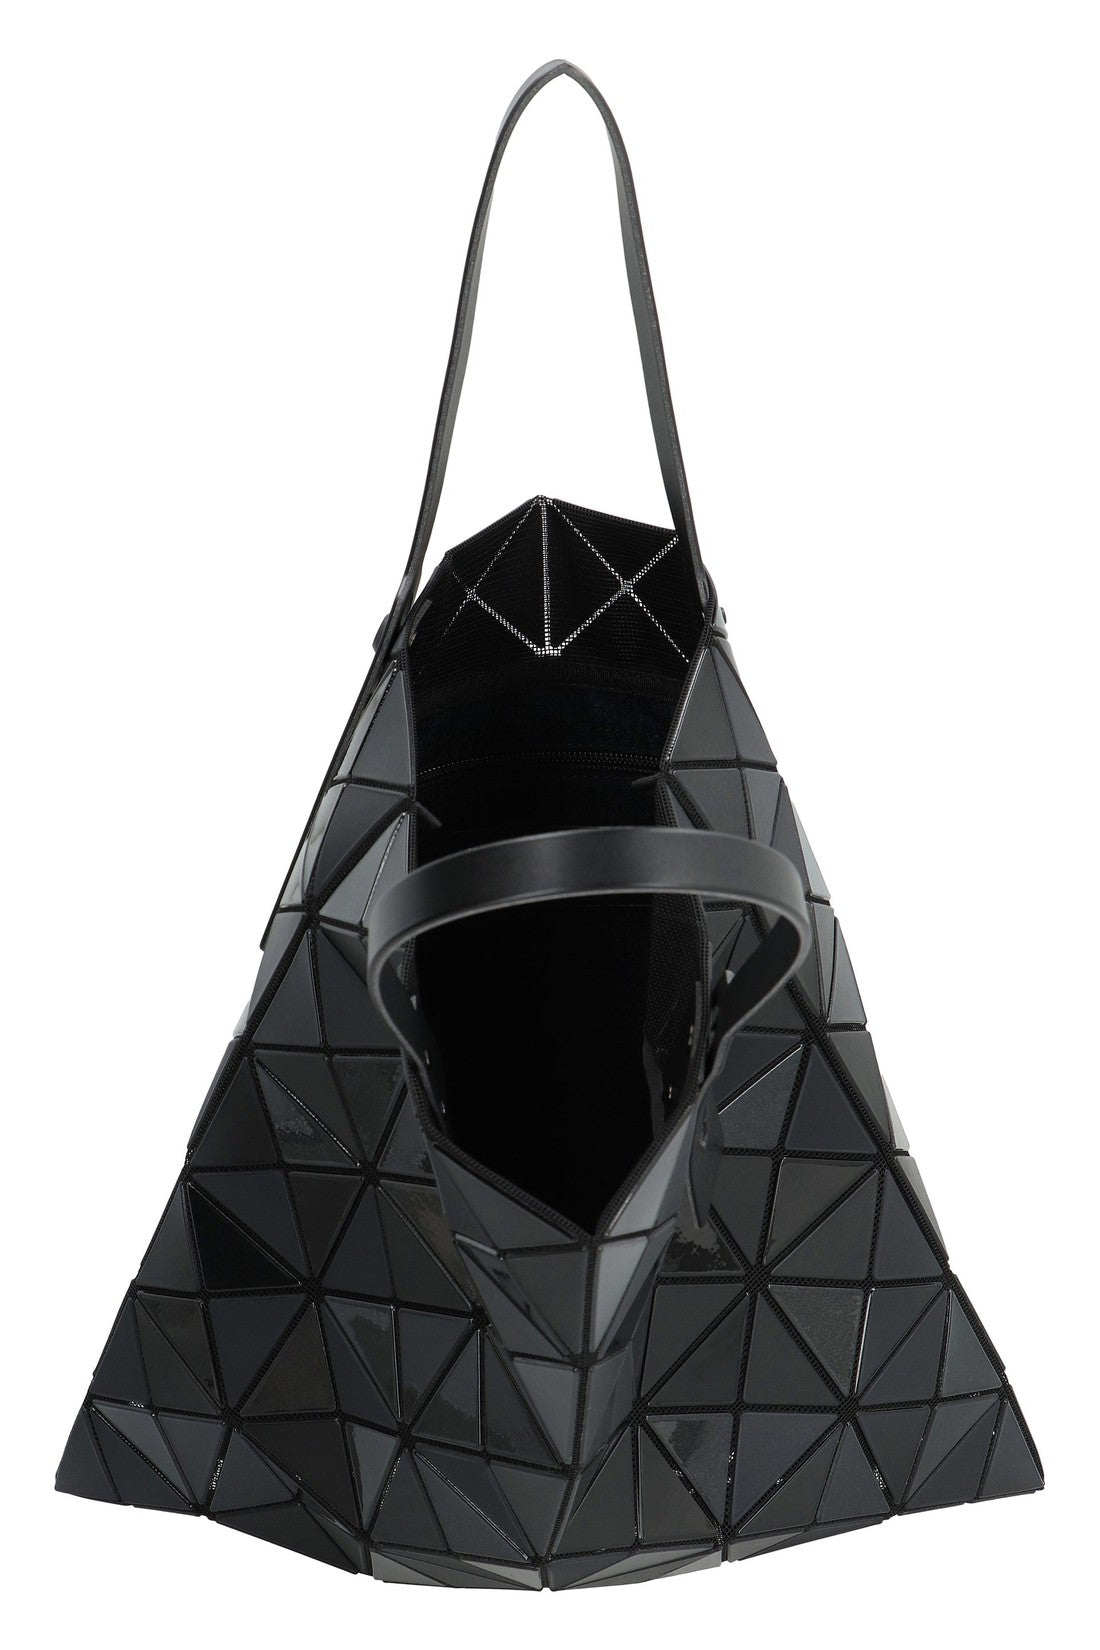 Bao Bao Issey Miyake-OUTLET-SALE-Quatro Tote bag-ARCHIVIST